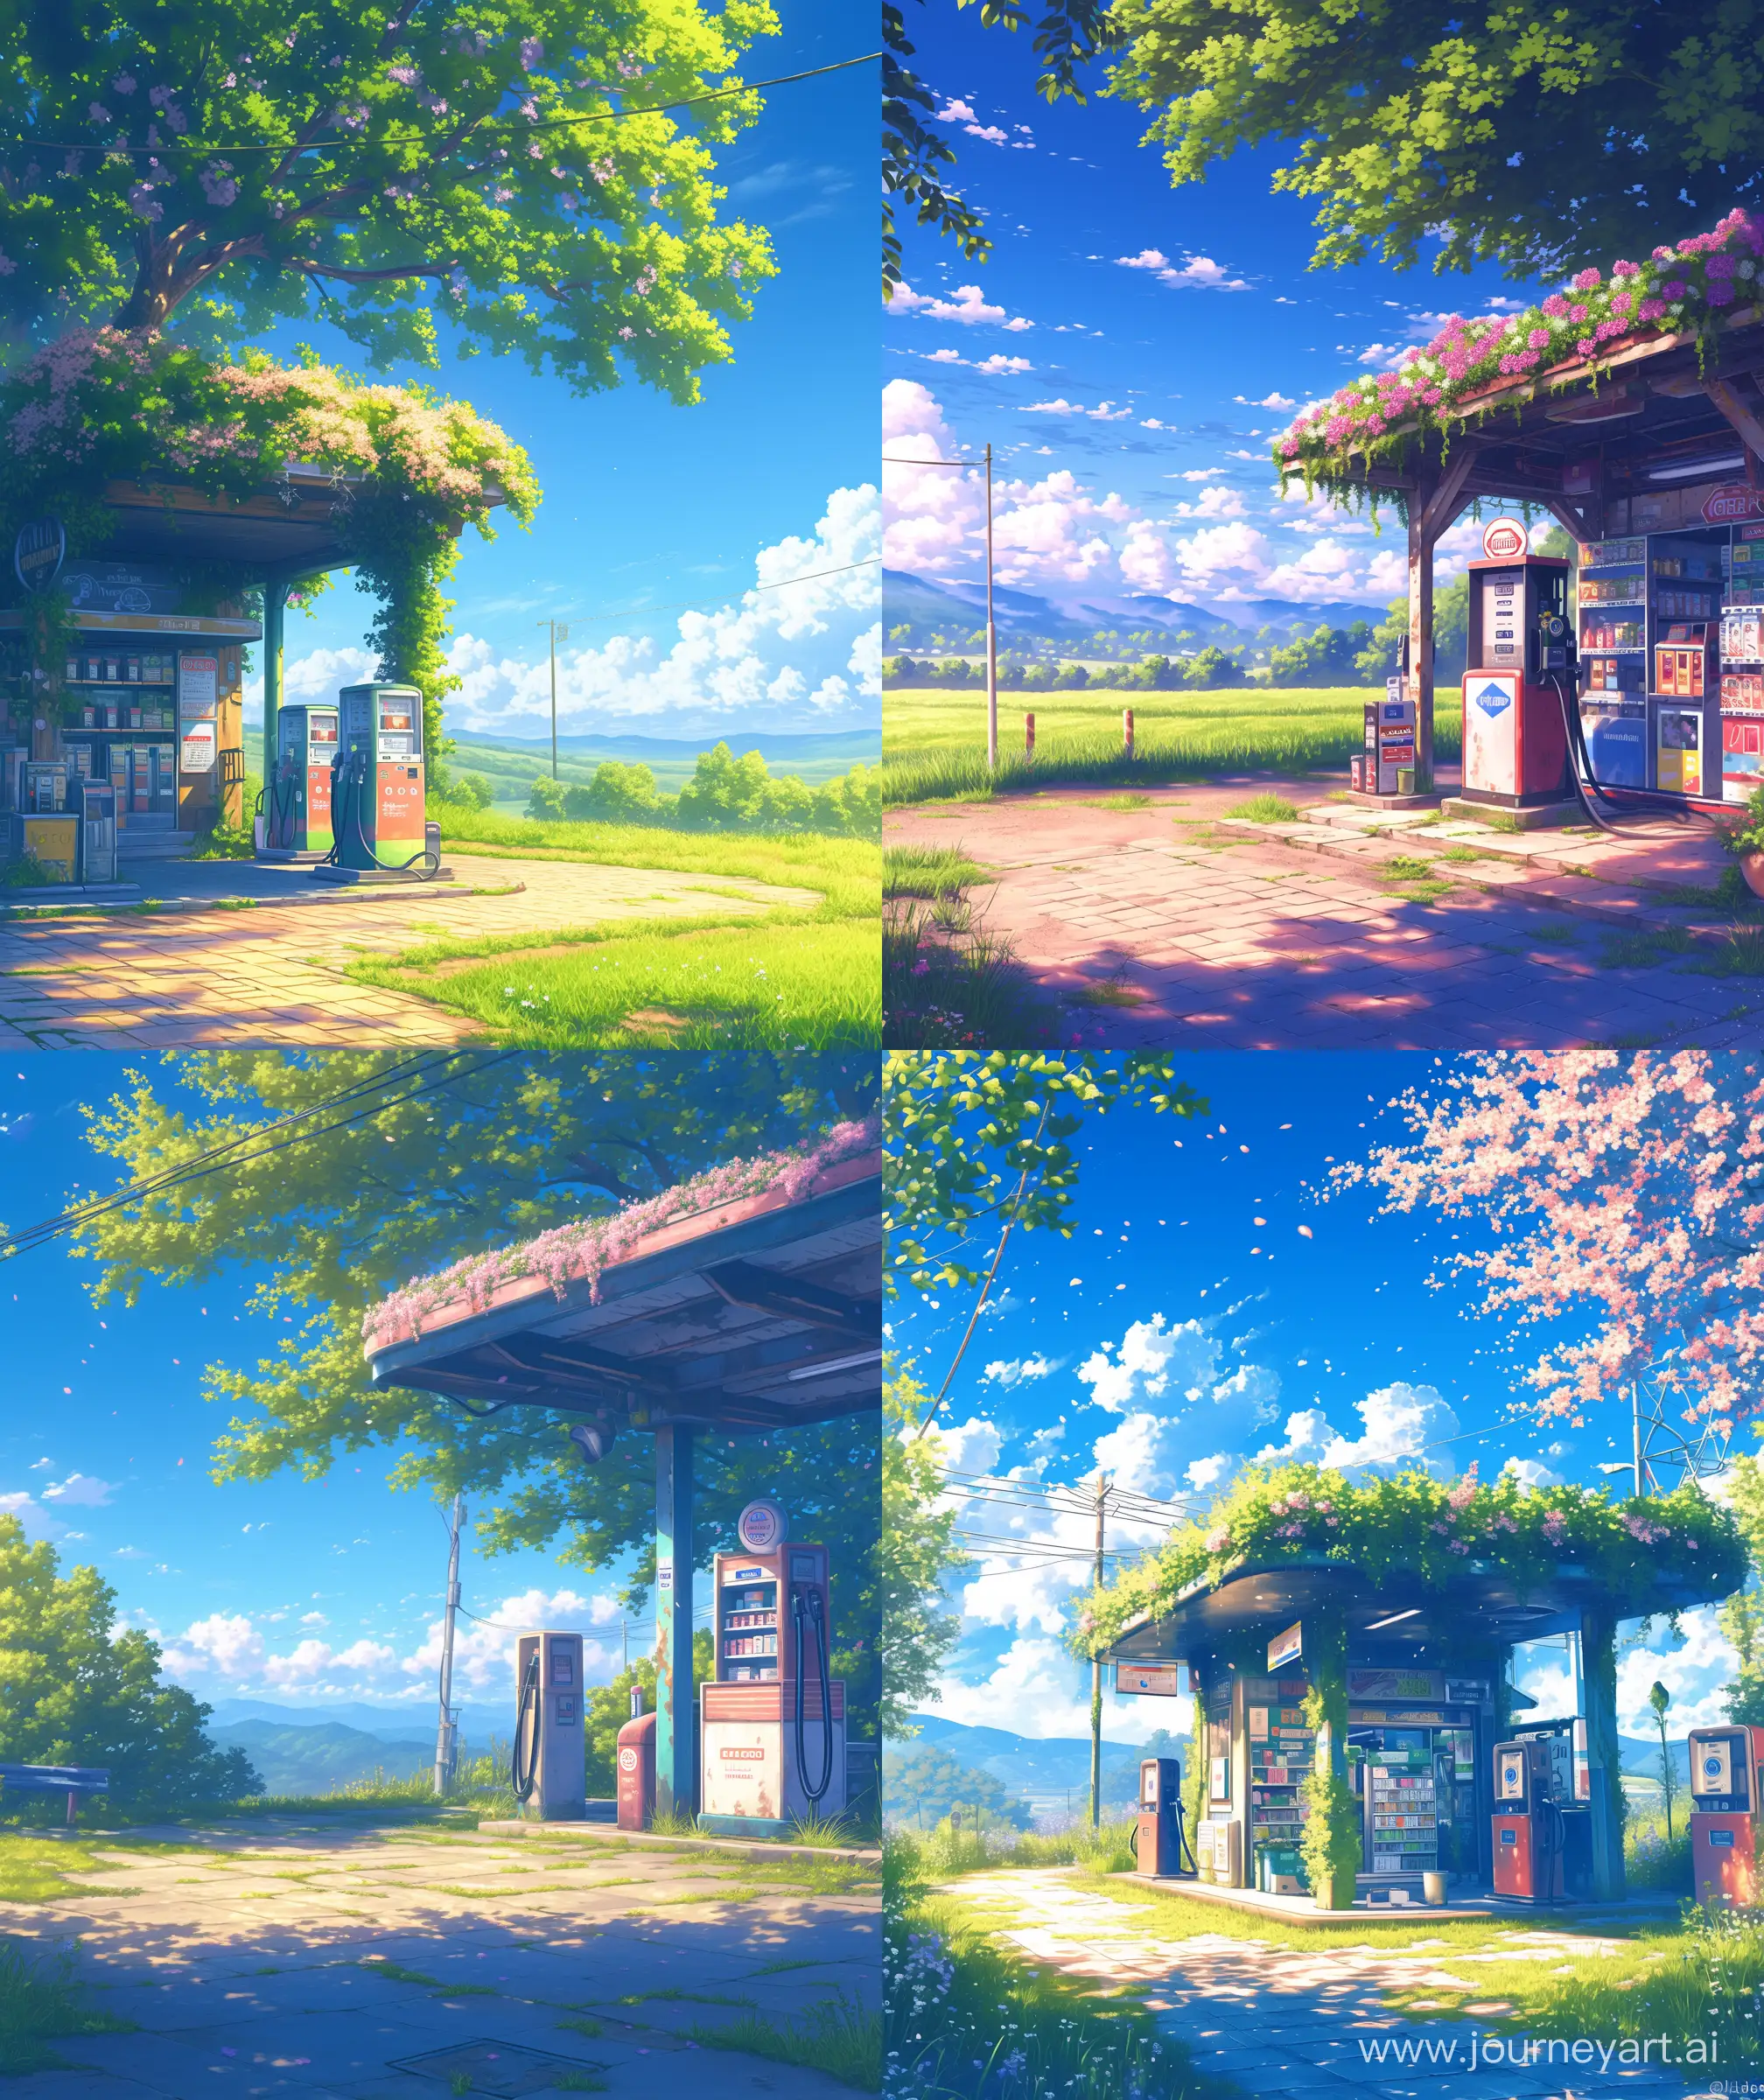 Beautiful anime scenary, Ghibli style,  old gas station with convenience store, grass , "flower cover gas roof ", countryside walk way, beautiful view, illustration, morning time, trees around gas station, morning time, Ultra hd, sharp details,high quality, no hyperrealistic --ar 27:32 --s 400 --niji 6